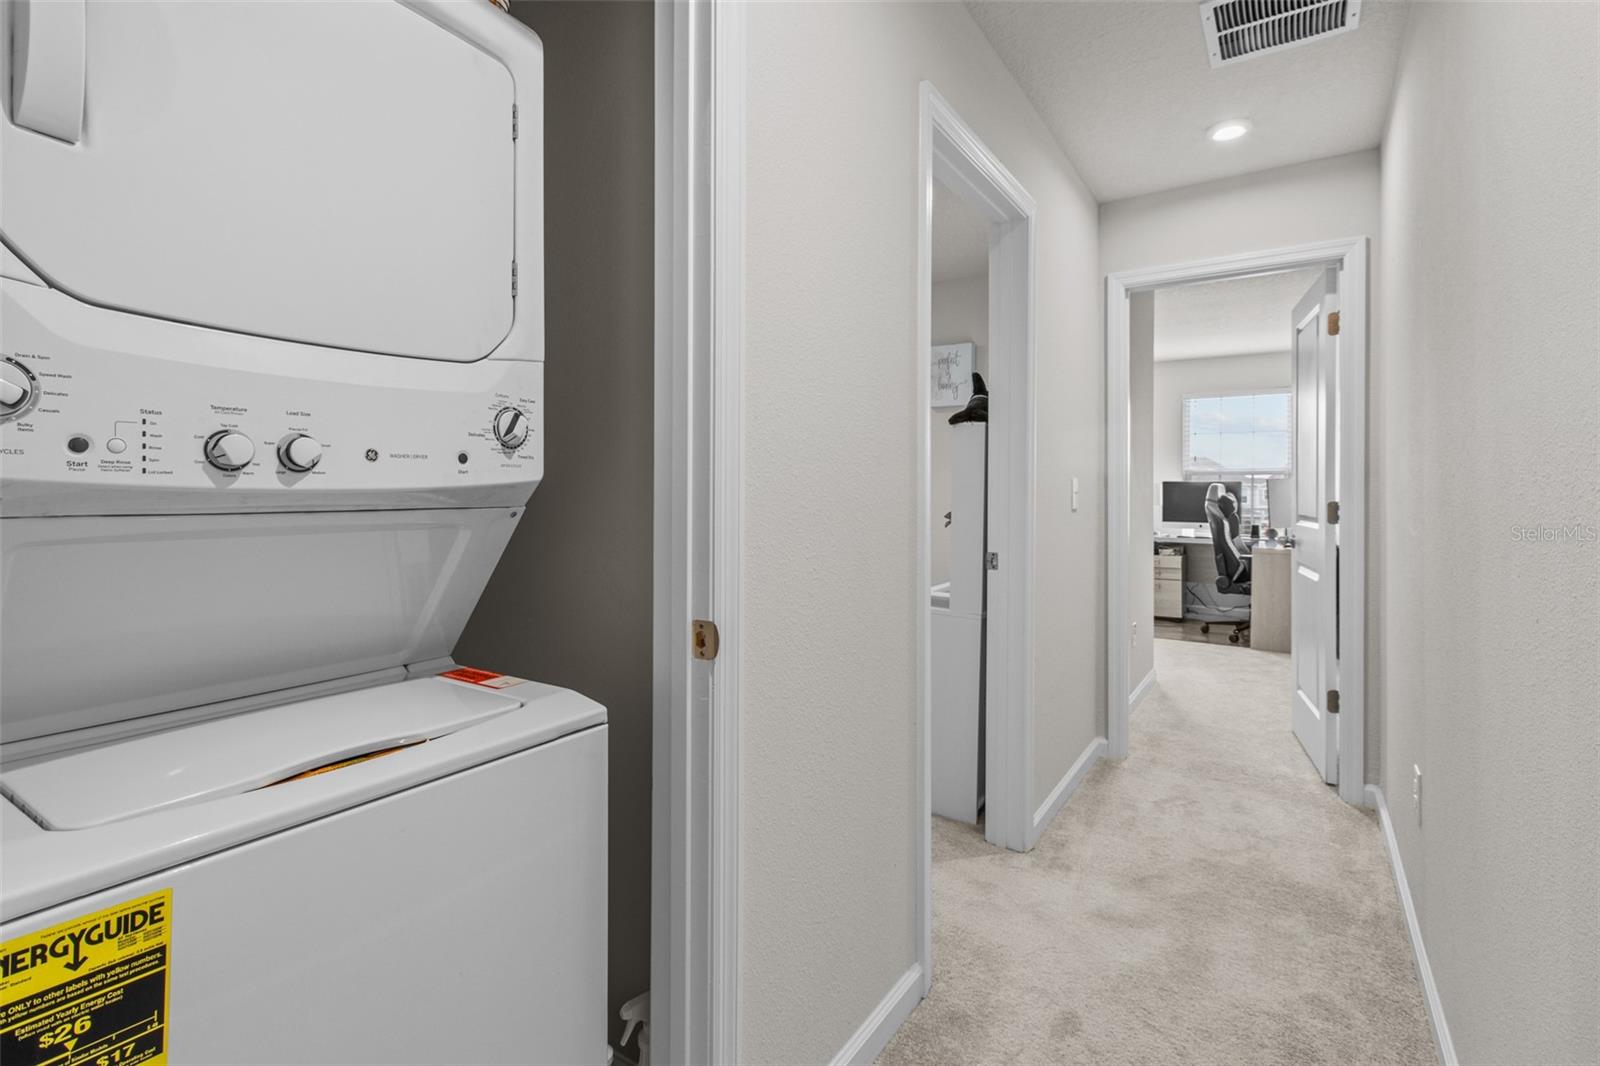 Washer and dryer located on second floor means no hauling of laundry up & down the stairs!